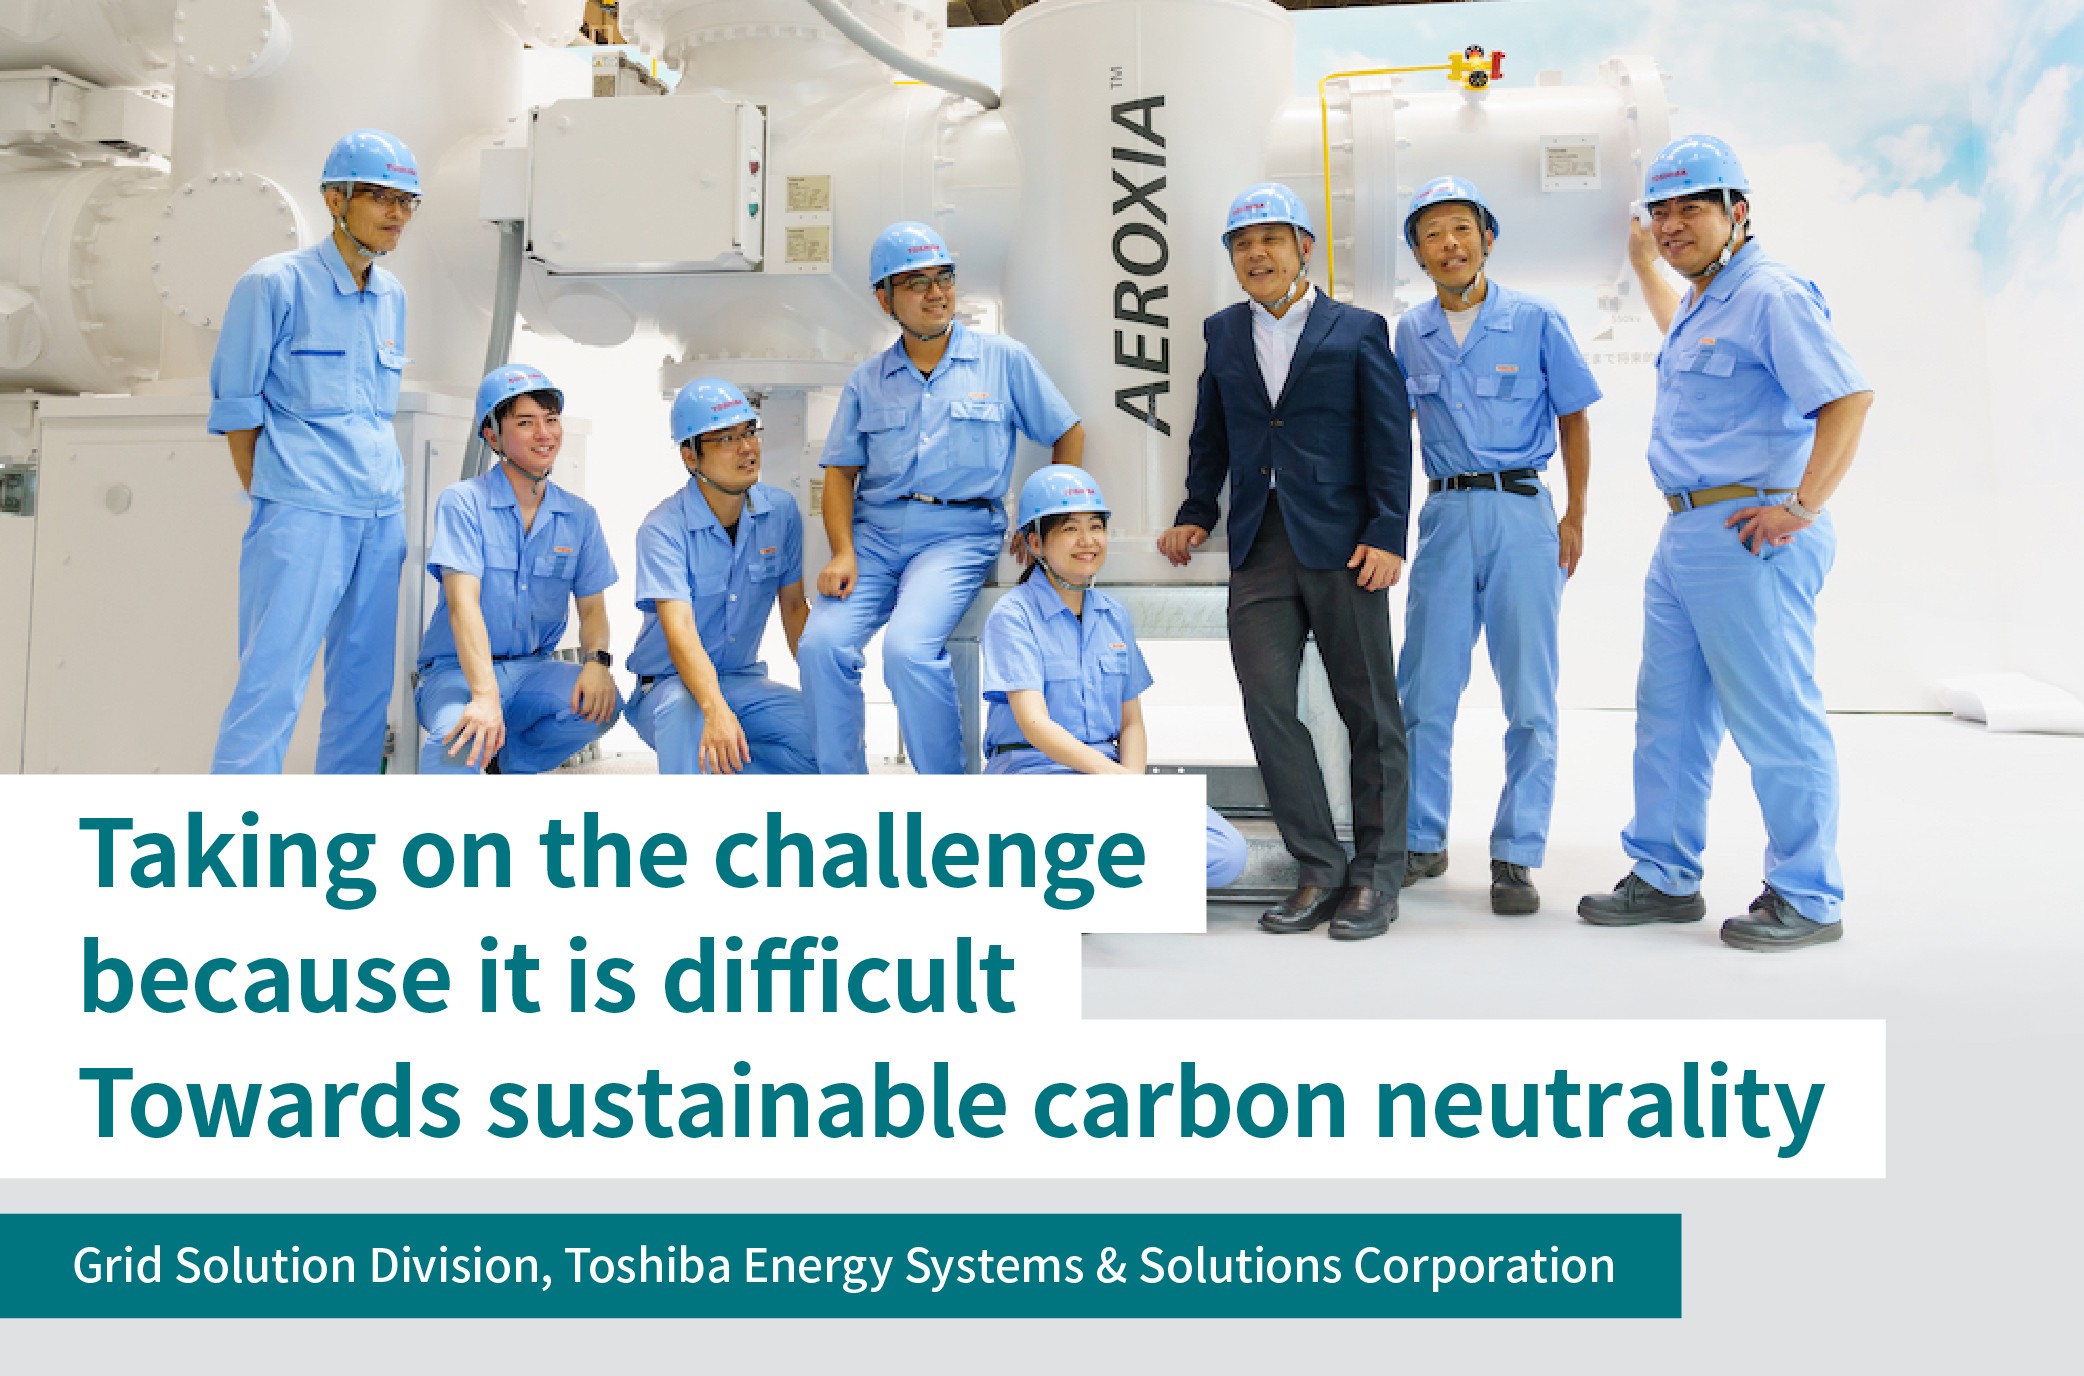 Toward Sustainable Electric Power Infrastructure, Part 2 -Toshiba’s Technology Makes the Difficult Possible, the Resolve of a Leading Company